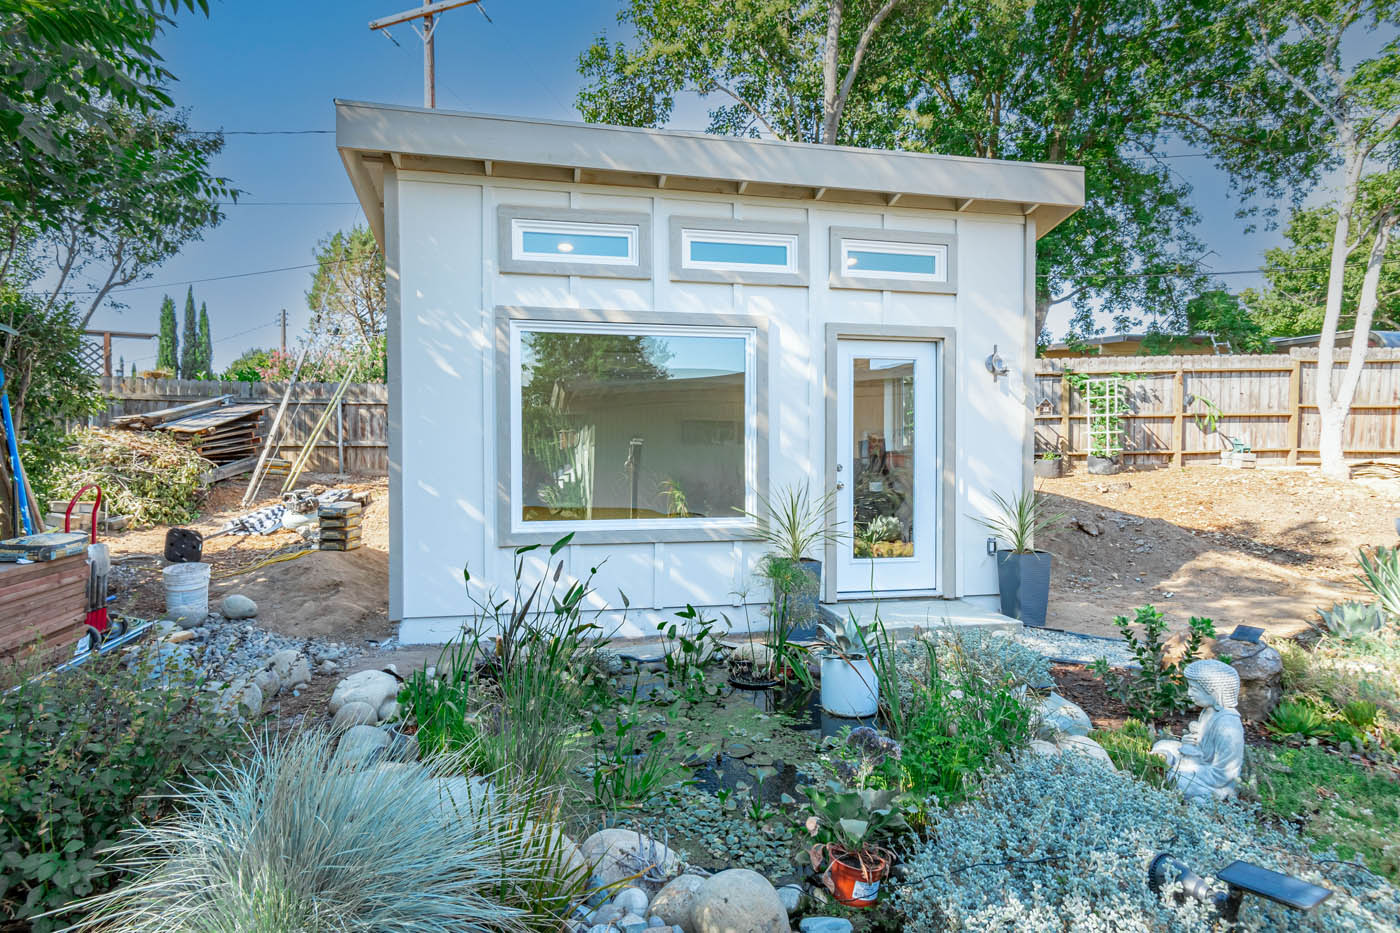 A Orlando detached ADU in a California backyard by a pool, learn more about our best tiny home builder in Orlando.